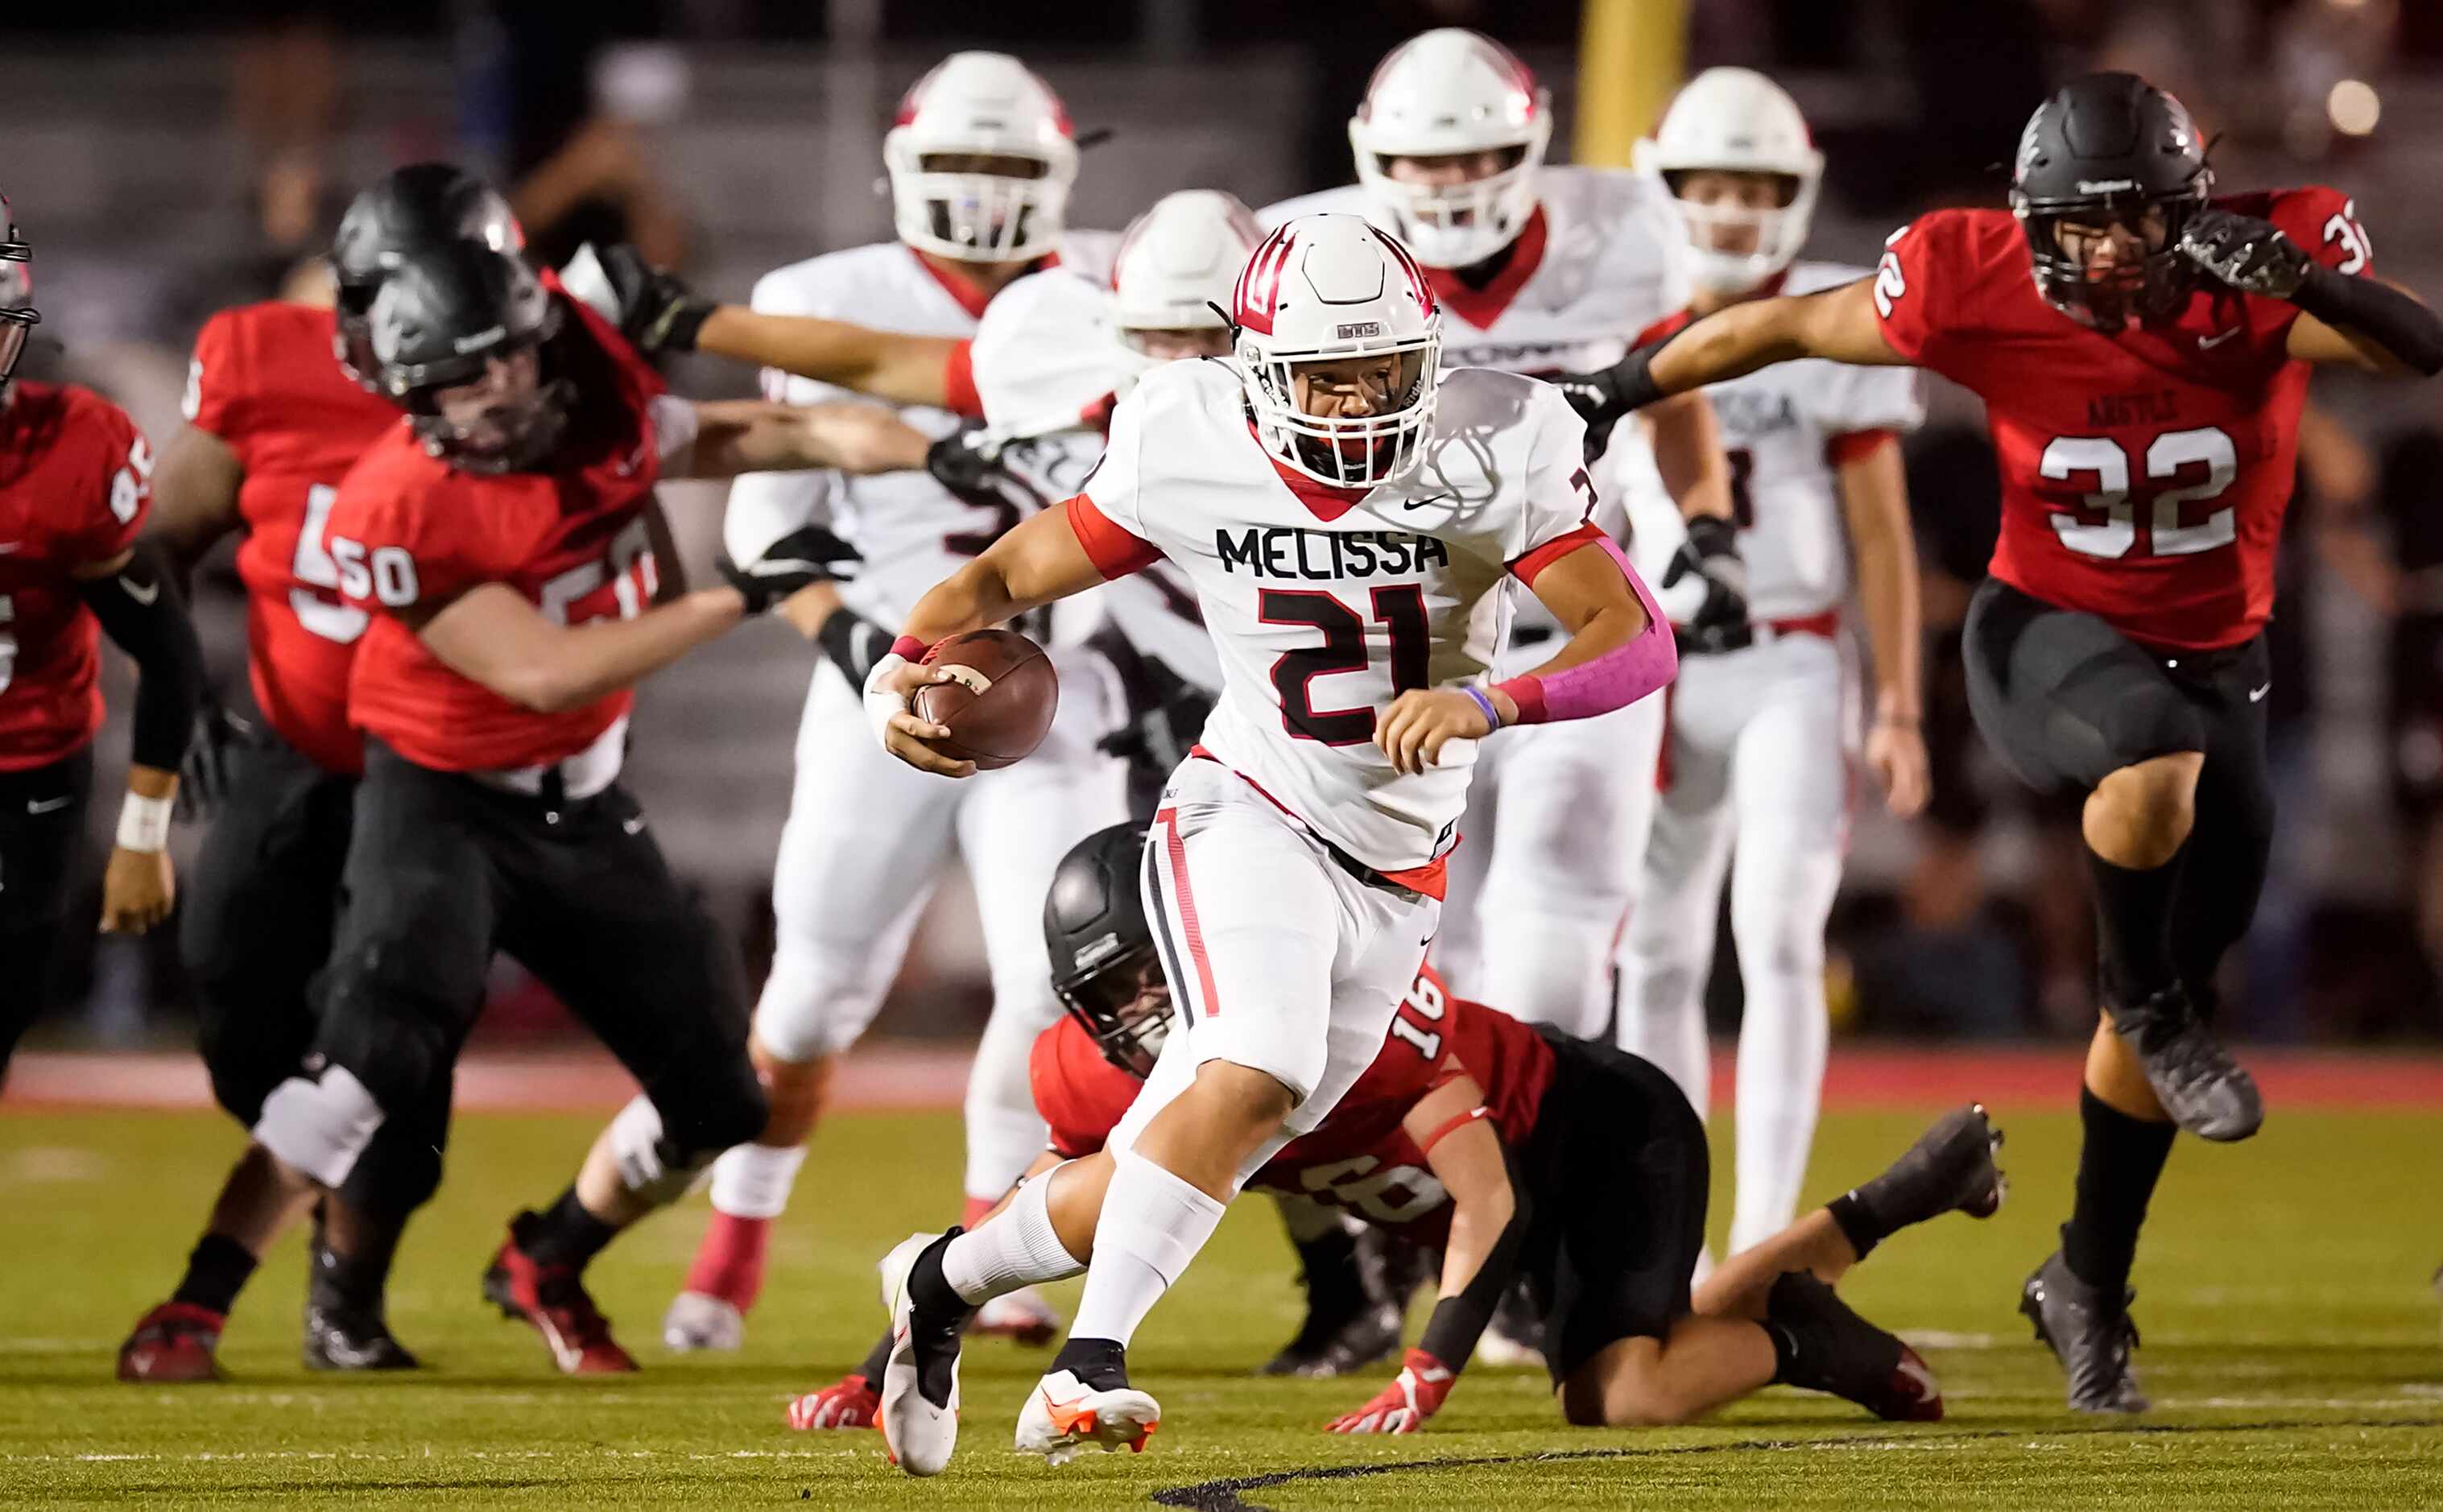 Melissa running back Braeden Smith (21) cuts through the Argyle defense during the first...